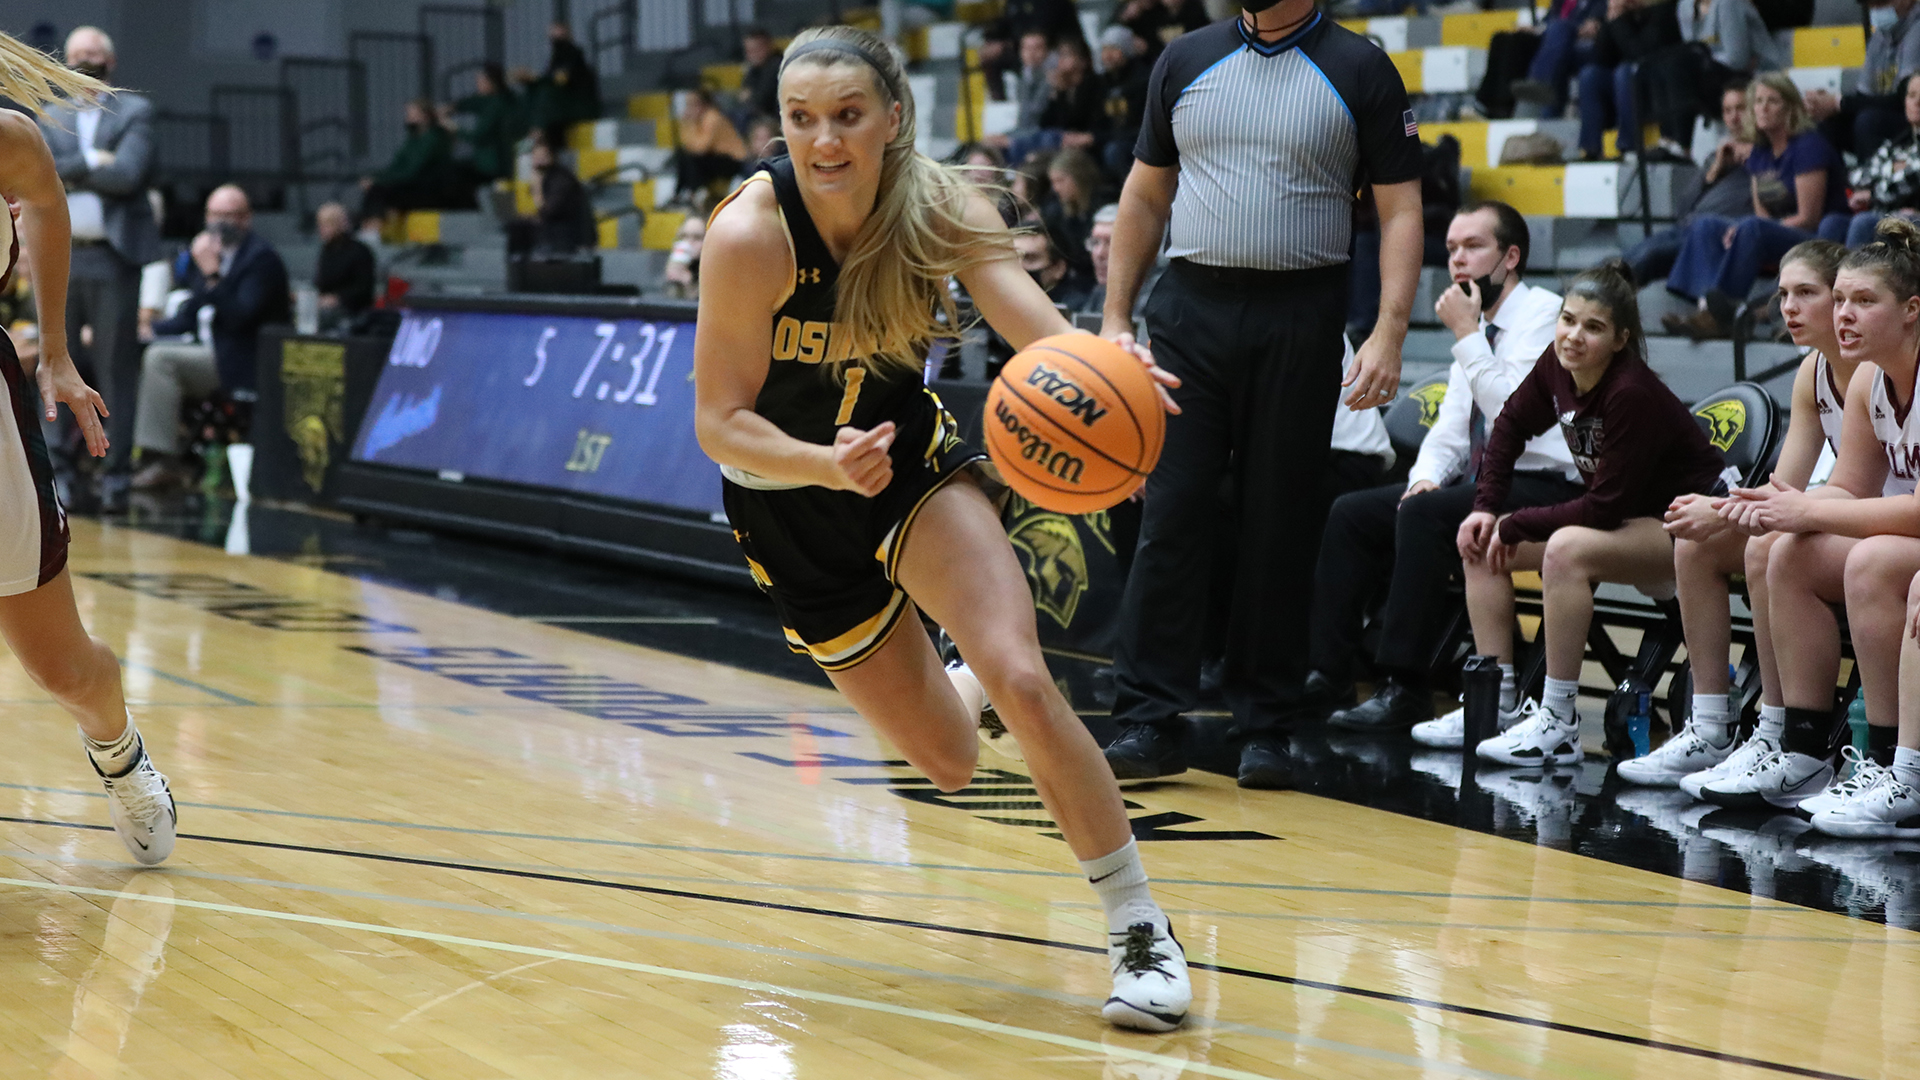 Julia Silloway scored a season-high 11 points against the Blugolds.